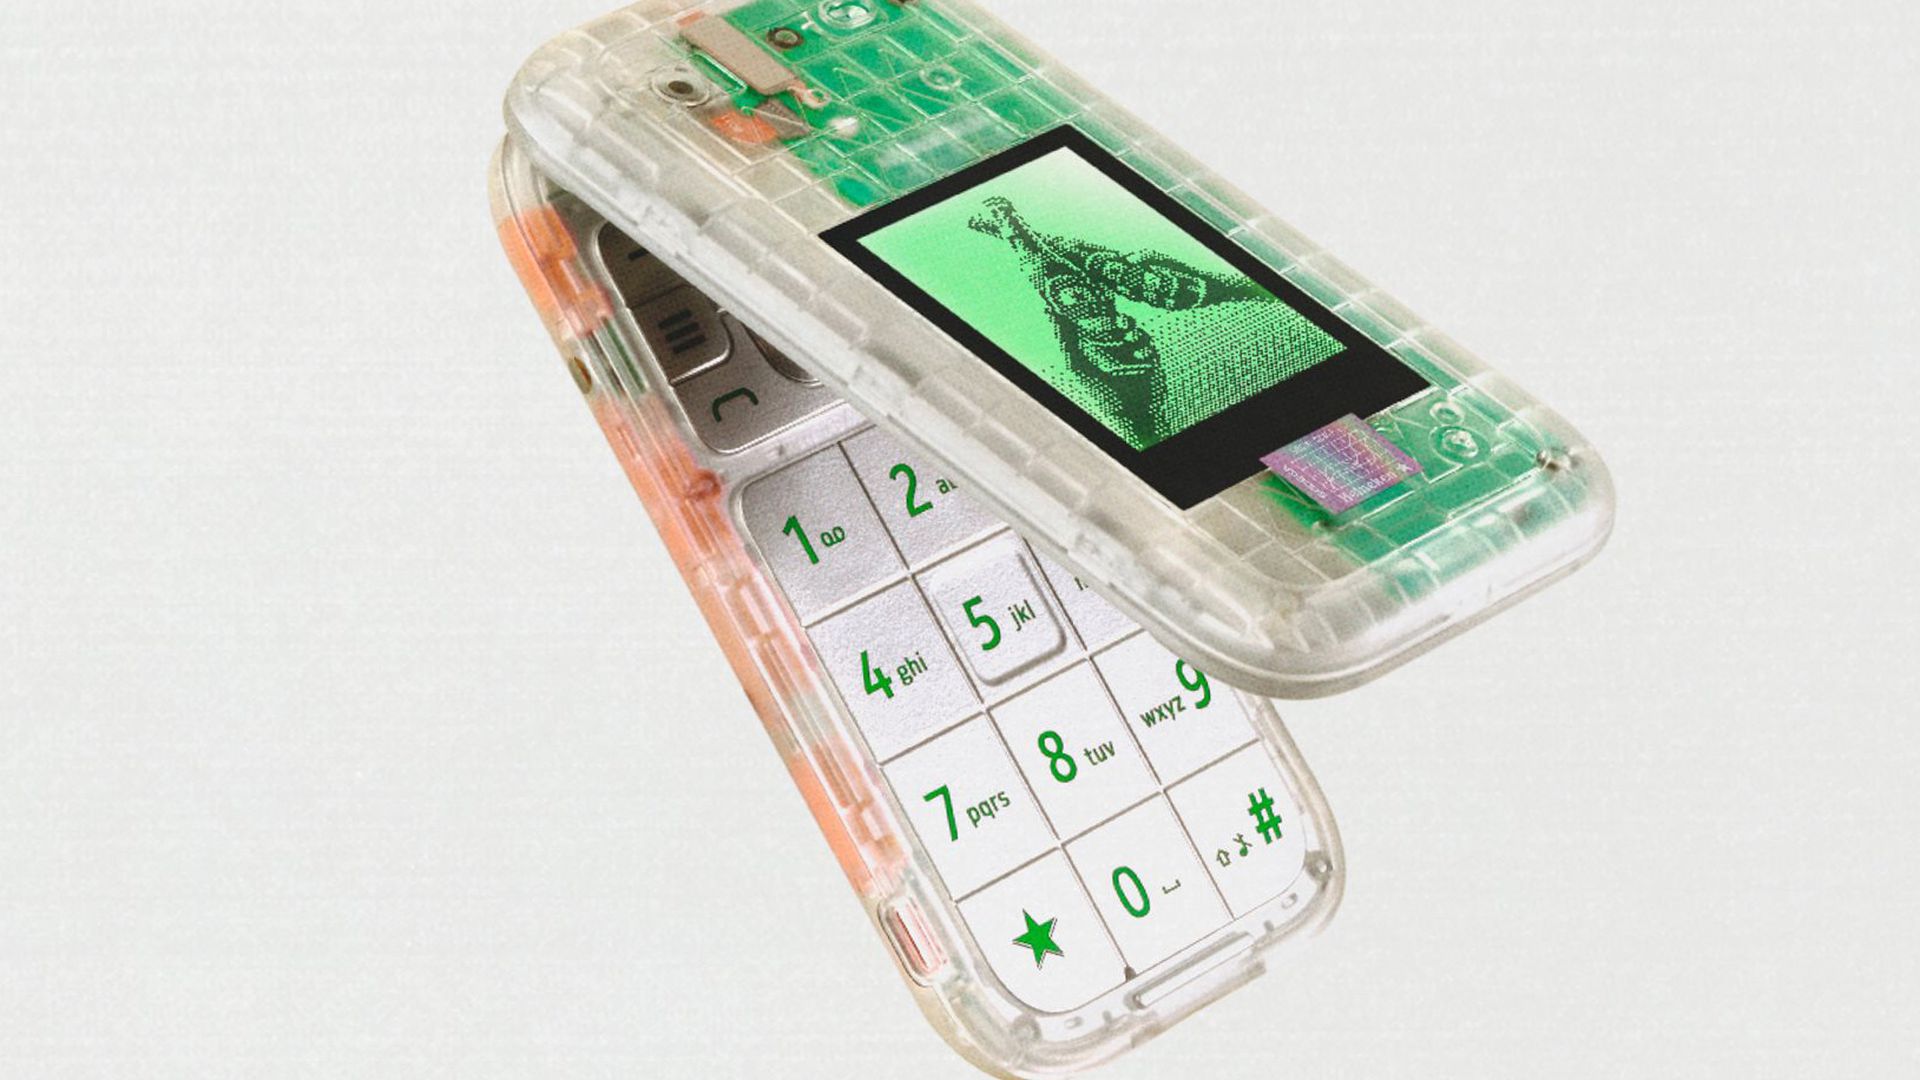 the boring phone is a nostalgic branding exercise by hmd and heineken